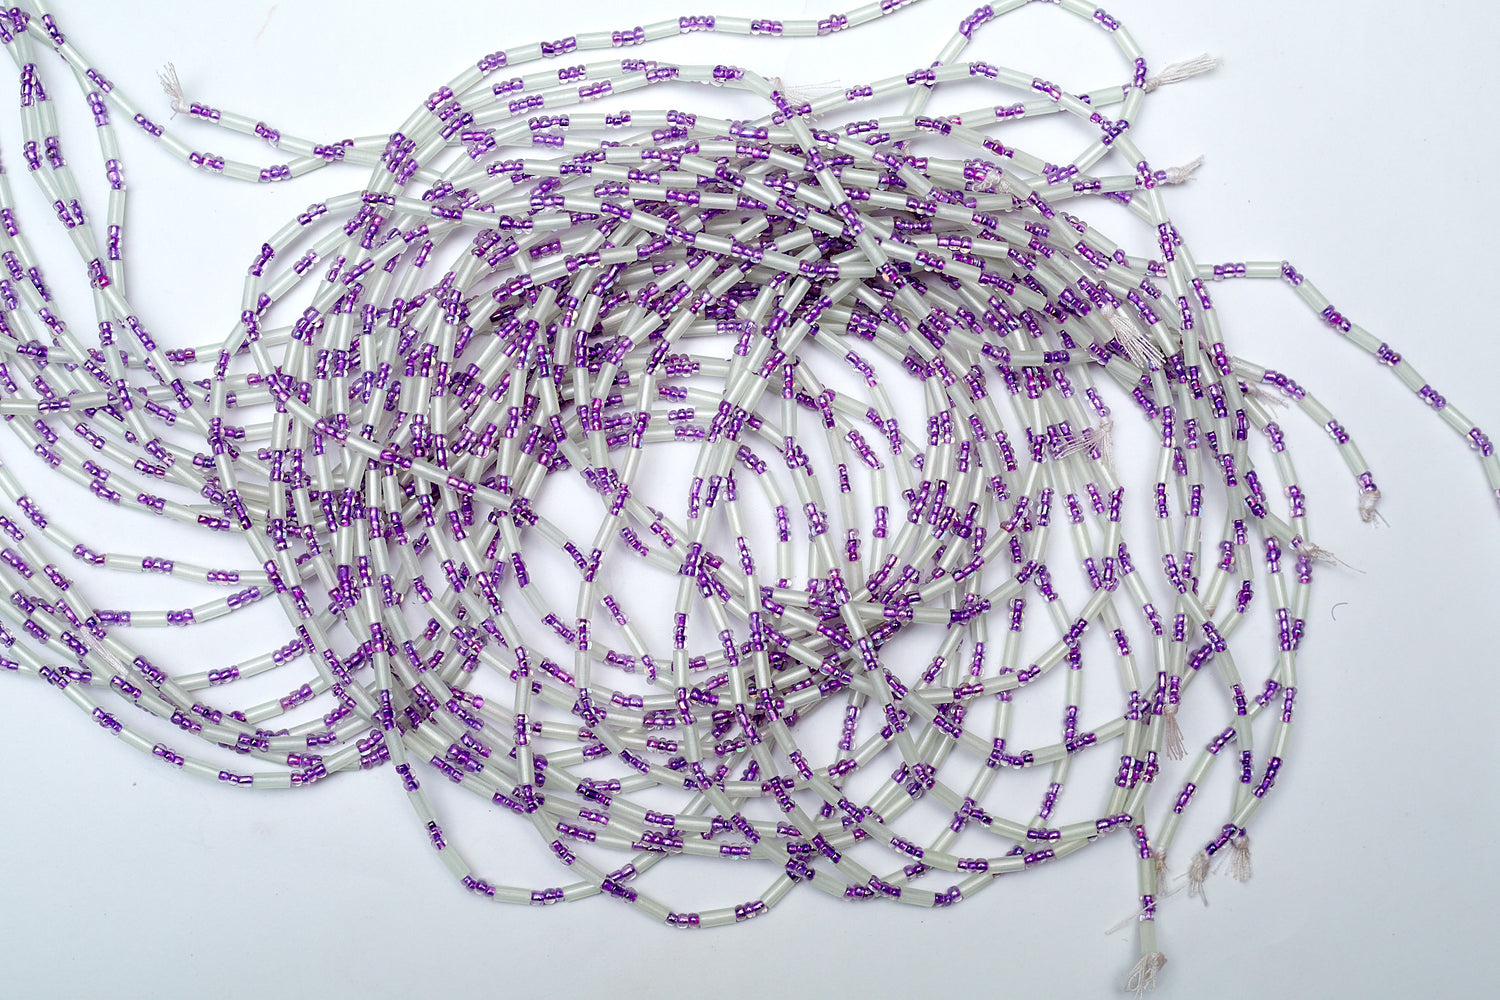 50 Inches Long Sexy Glow In The Dark Waist Beads, Clear And Purple Coloured(Tie On)